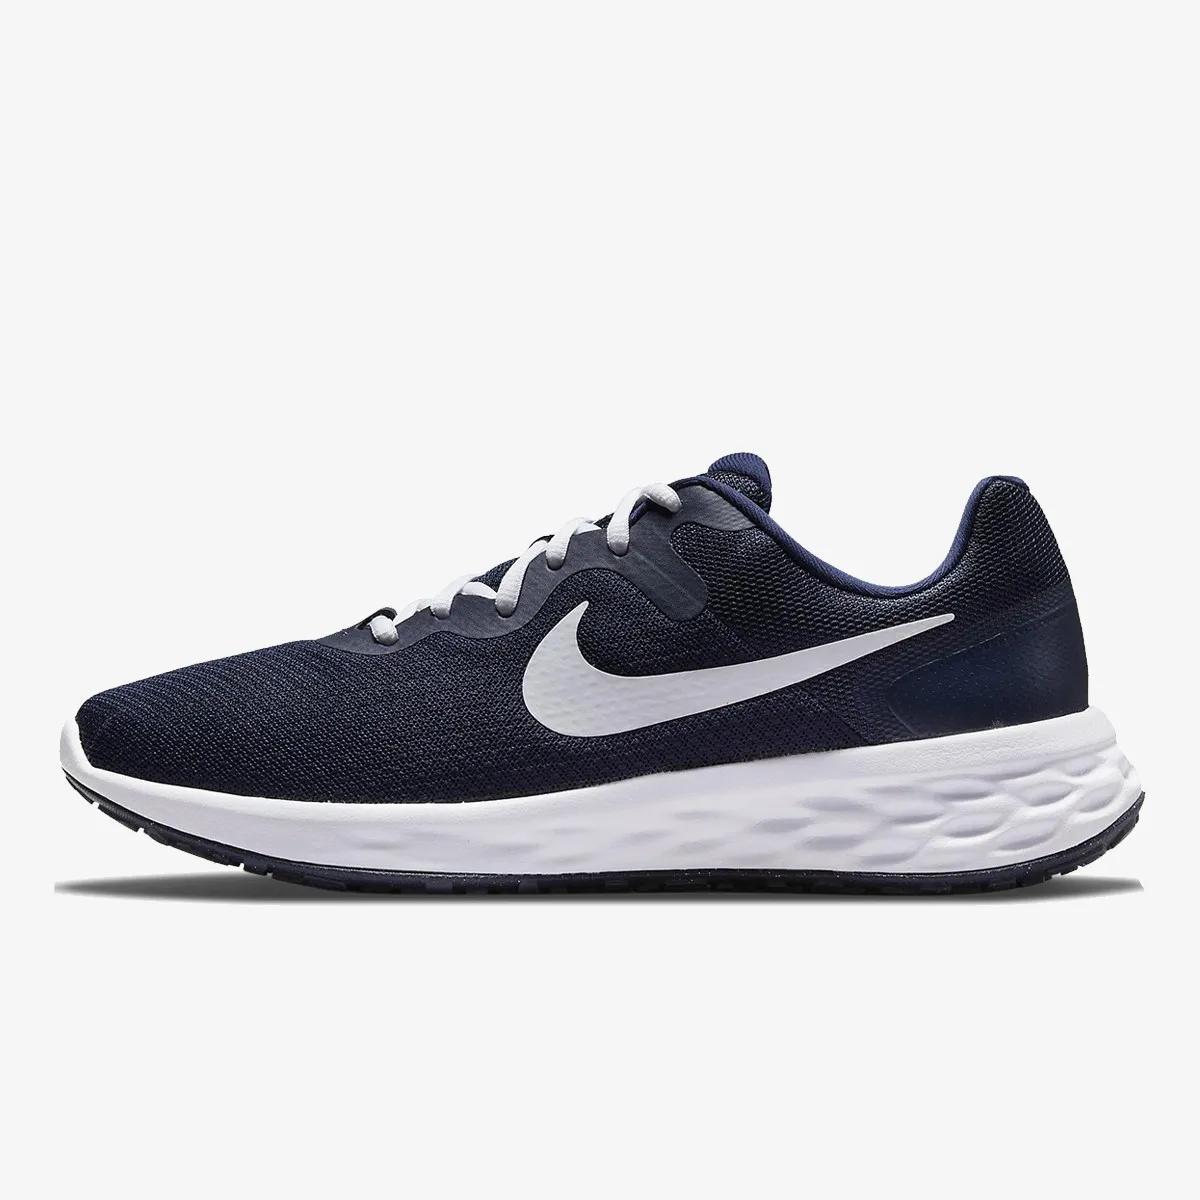 Transcend Inspector Appeal to be attractive nike performance revolution ...